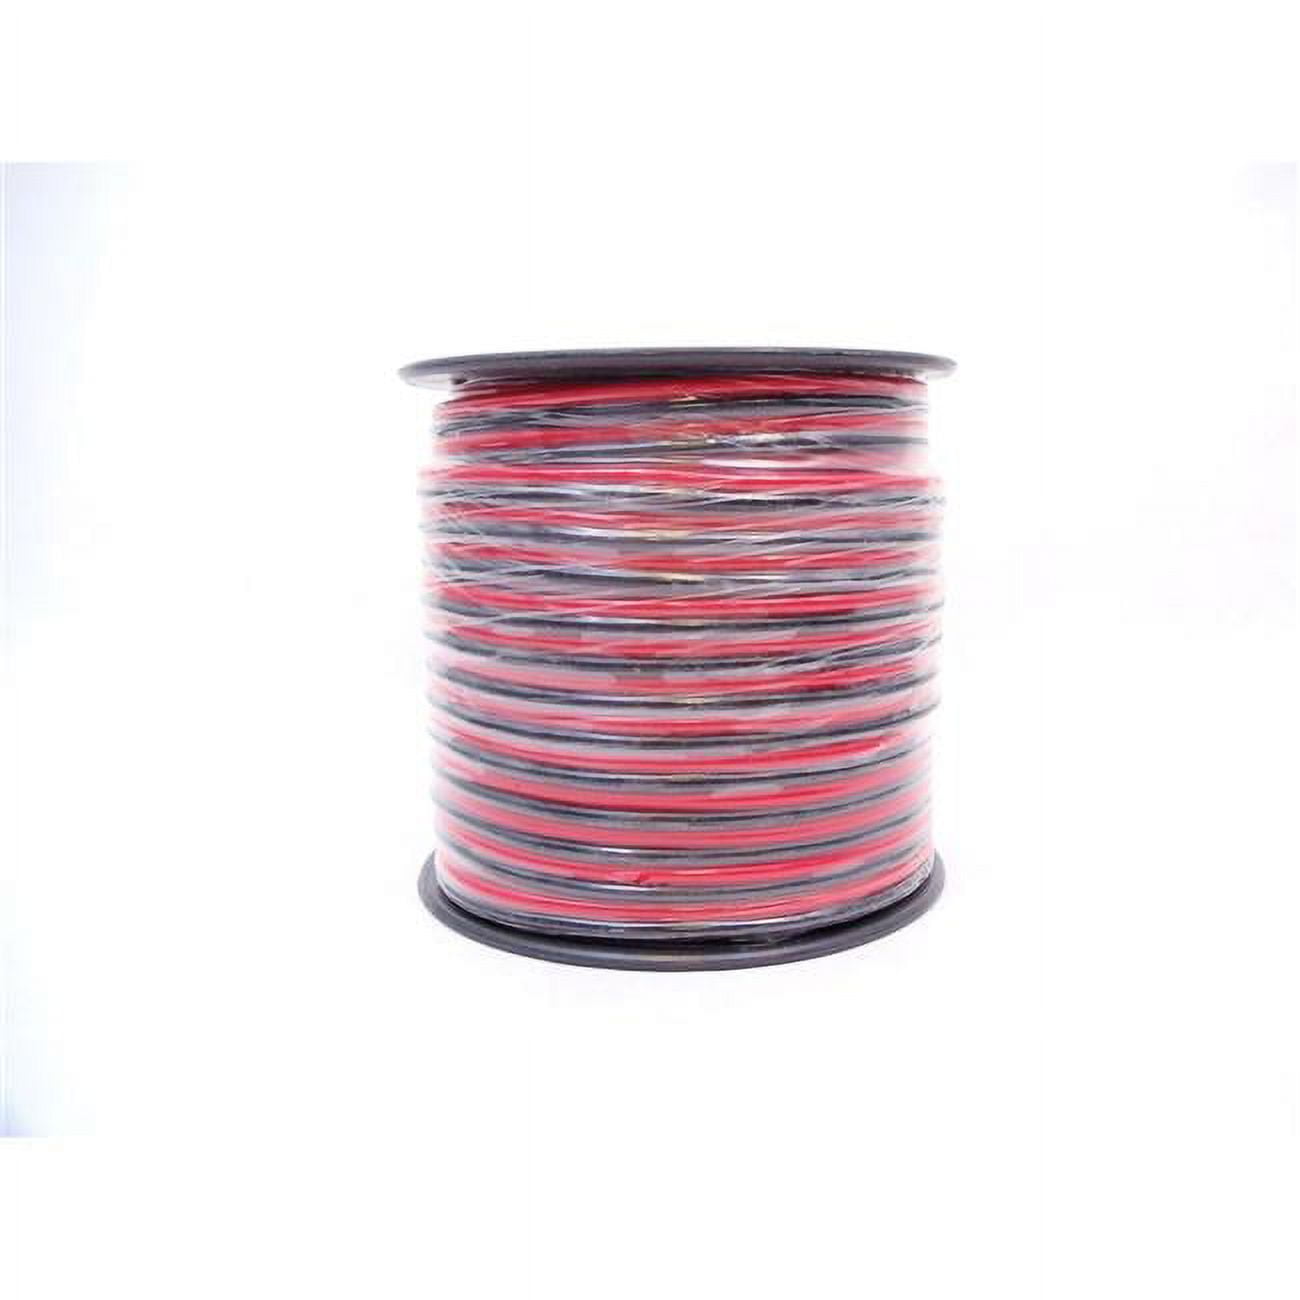 Picture of Twinpoint 16RB1 Workman 100 ft. Spool of 16 Gauge DC Zip Wire, Red & Black